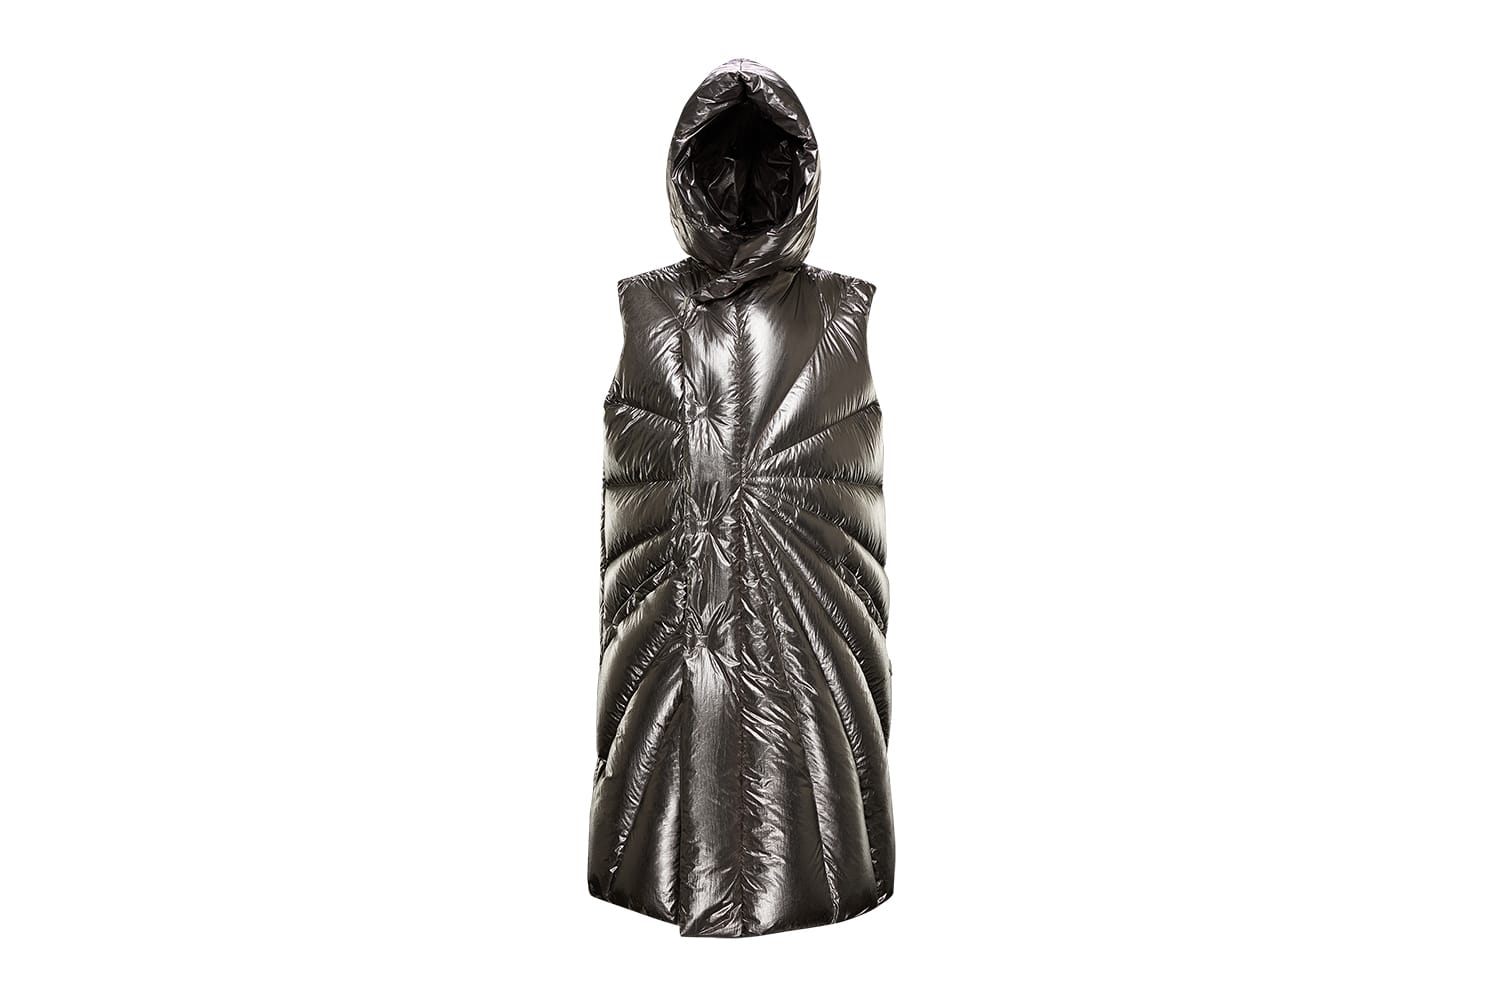 Moncler + Rick Owens Collection Full Look | HYPEBEAST